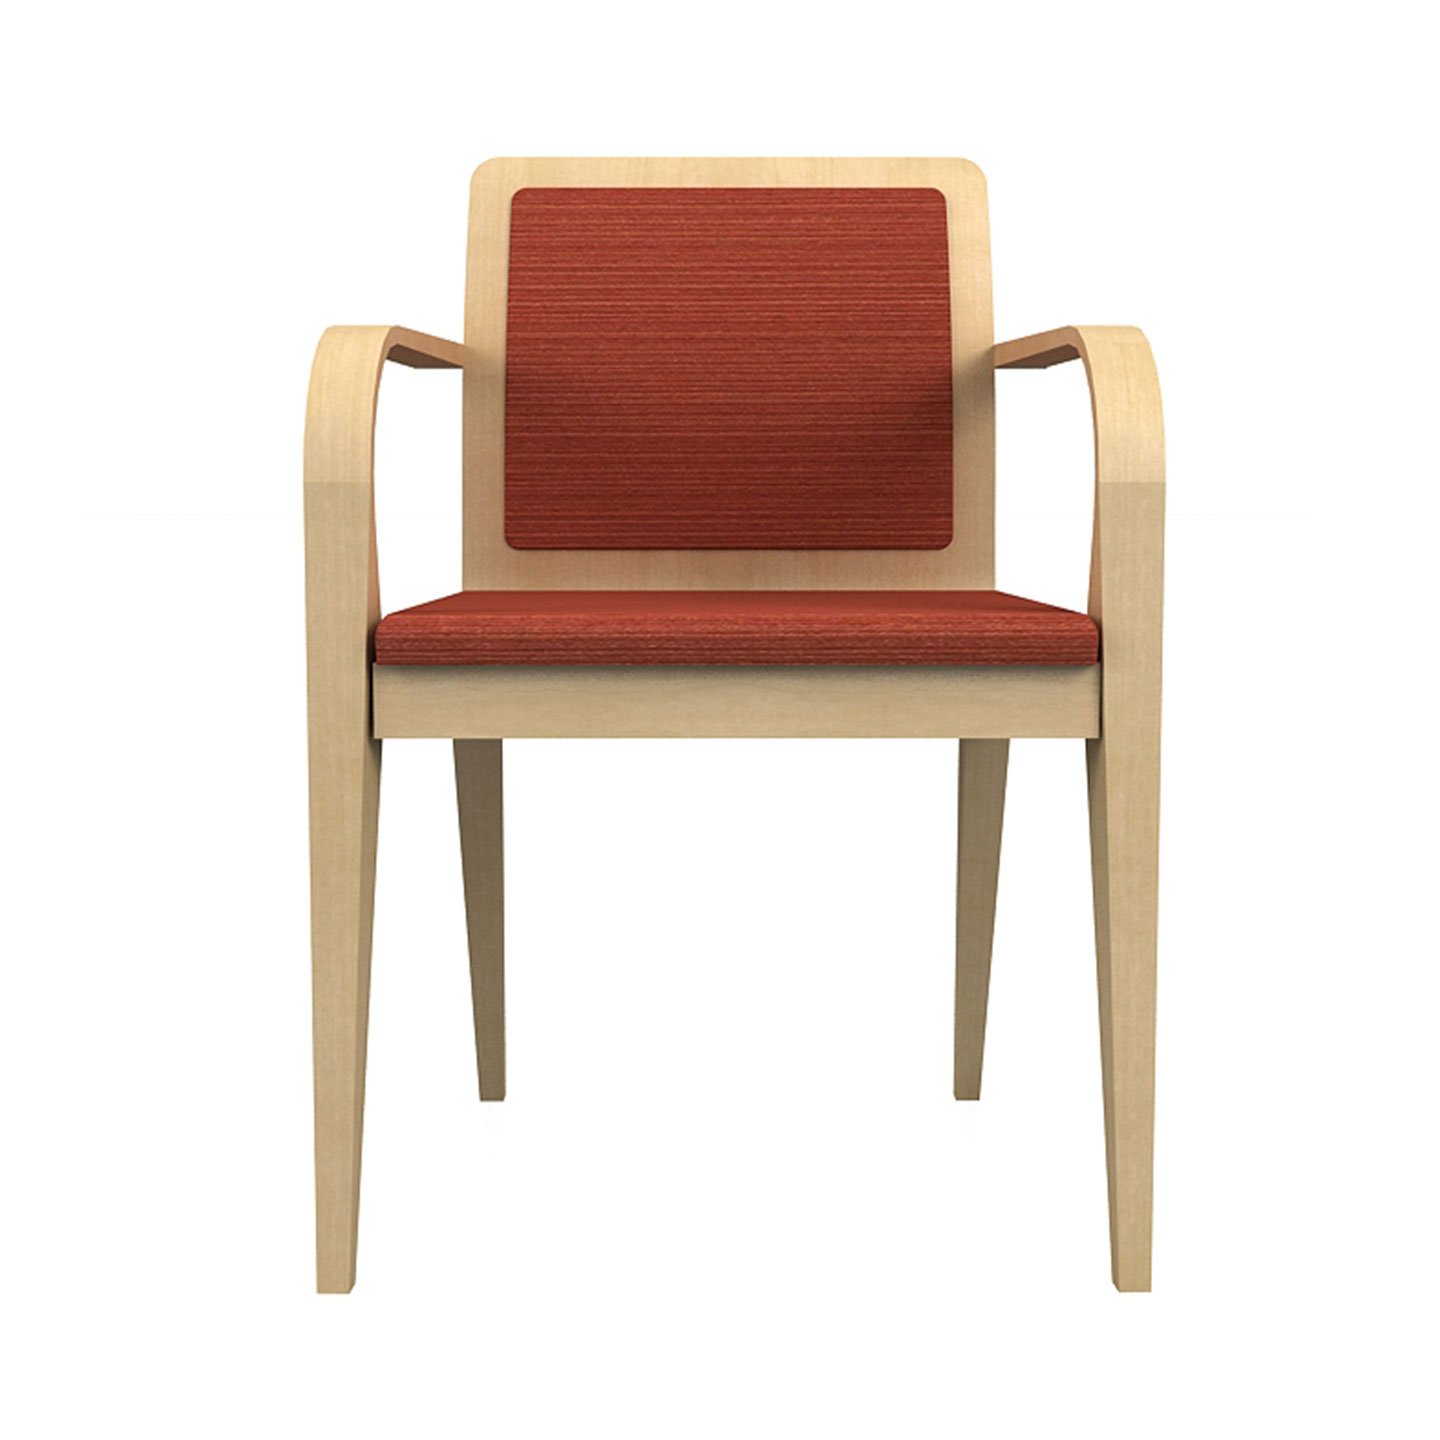 Haworth Hello Side chair in red fabric upholstery and light wood frame front view